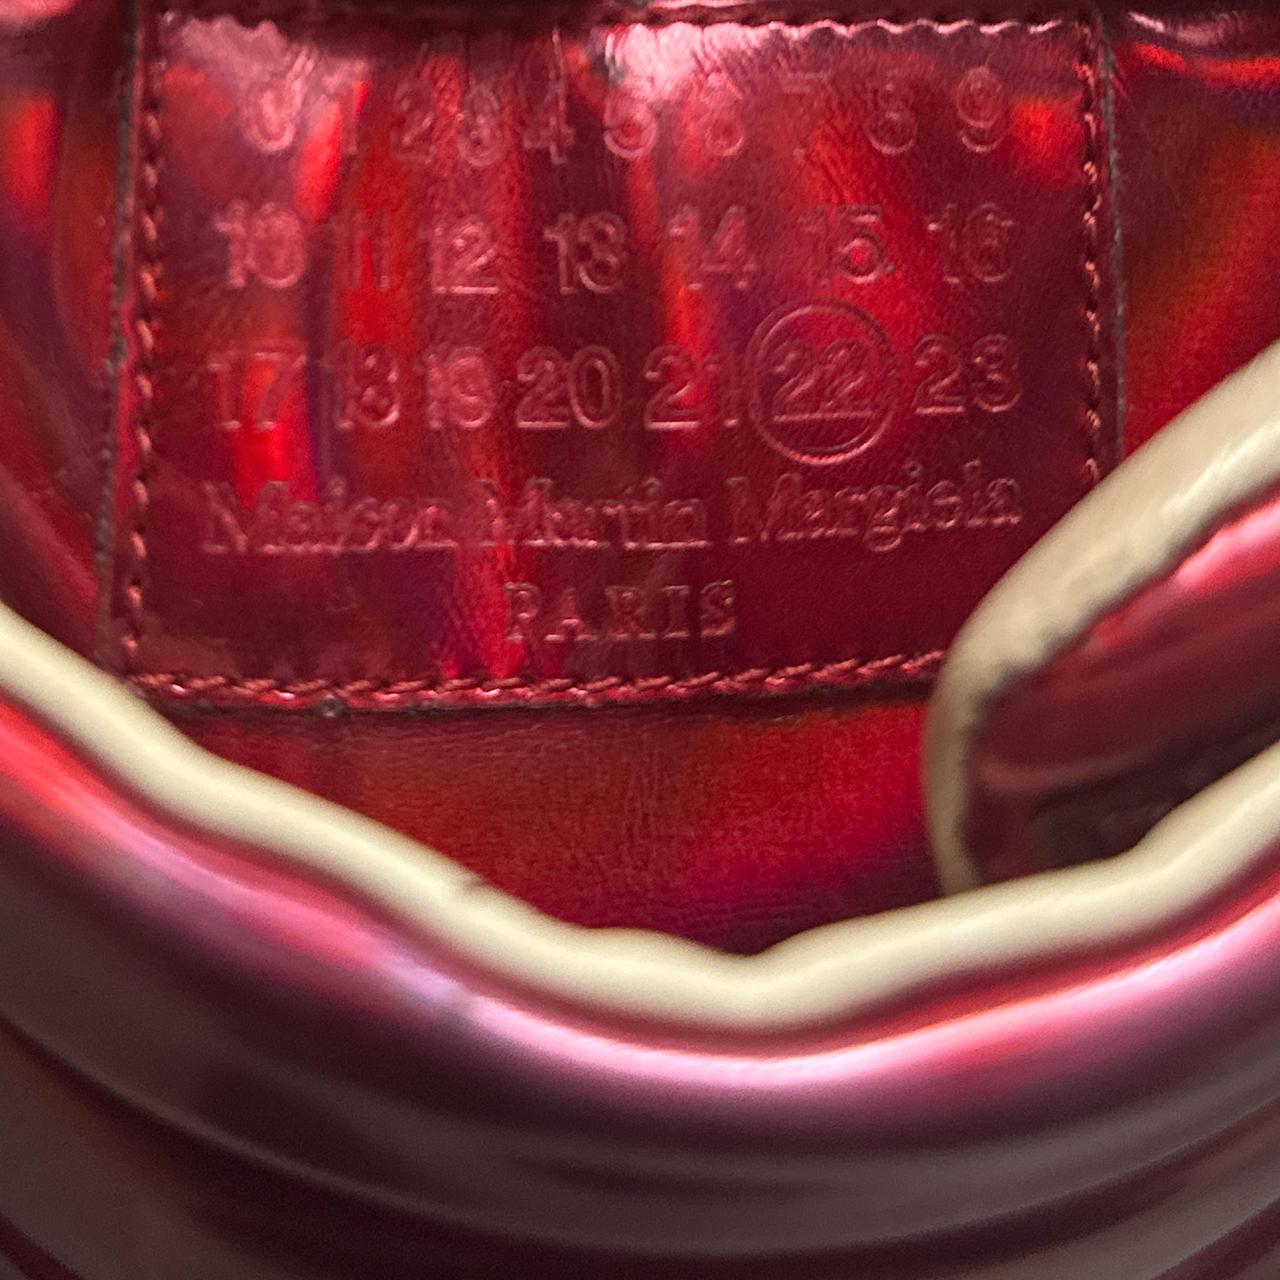 Maison Margiela Reflective Red Future Space Boots